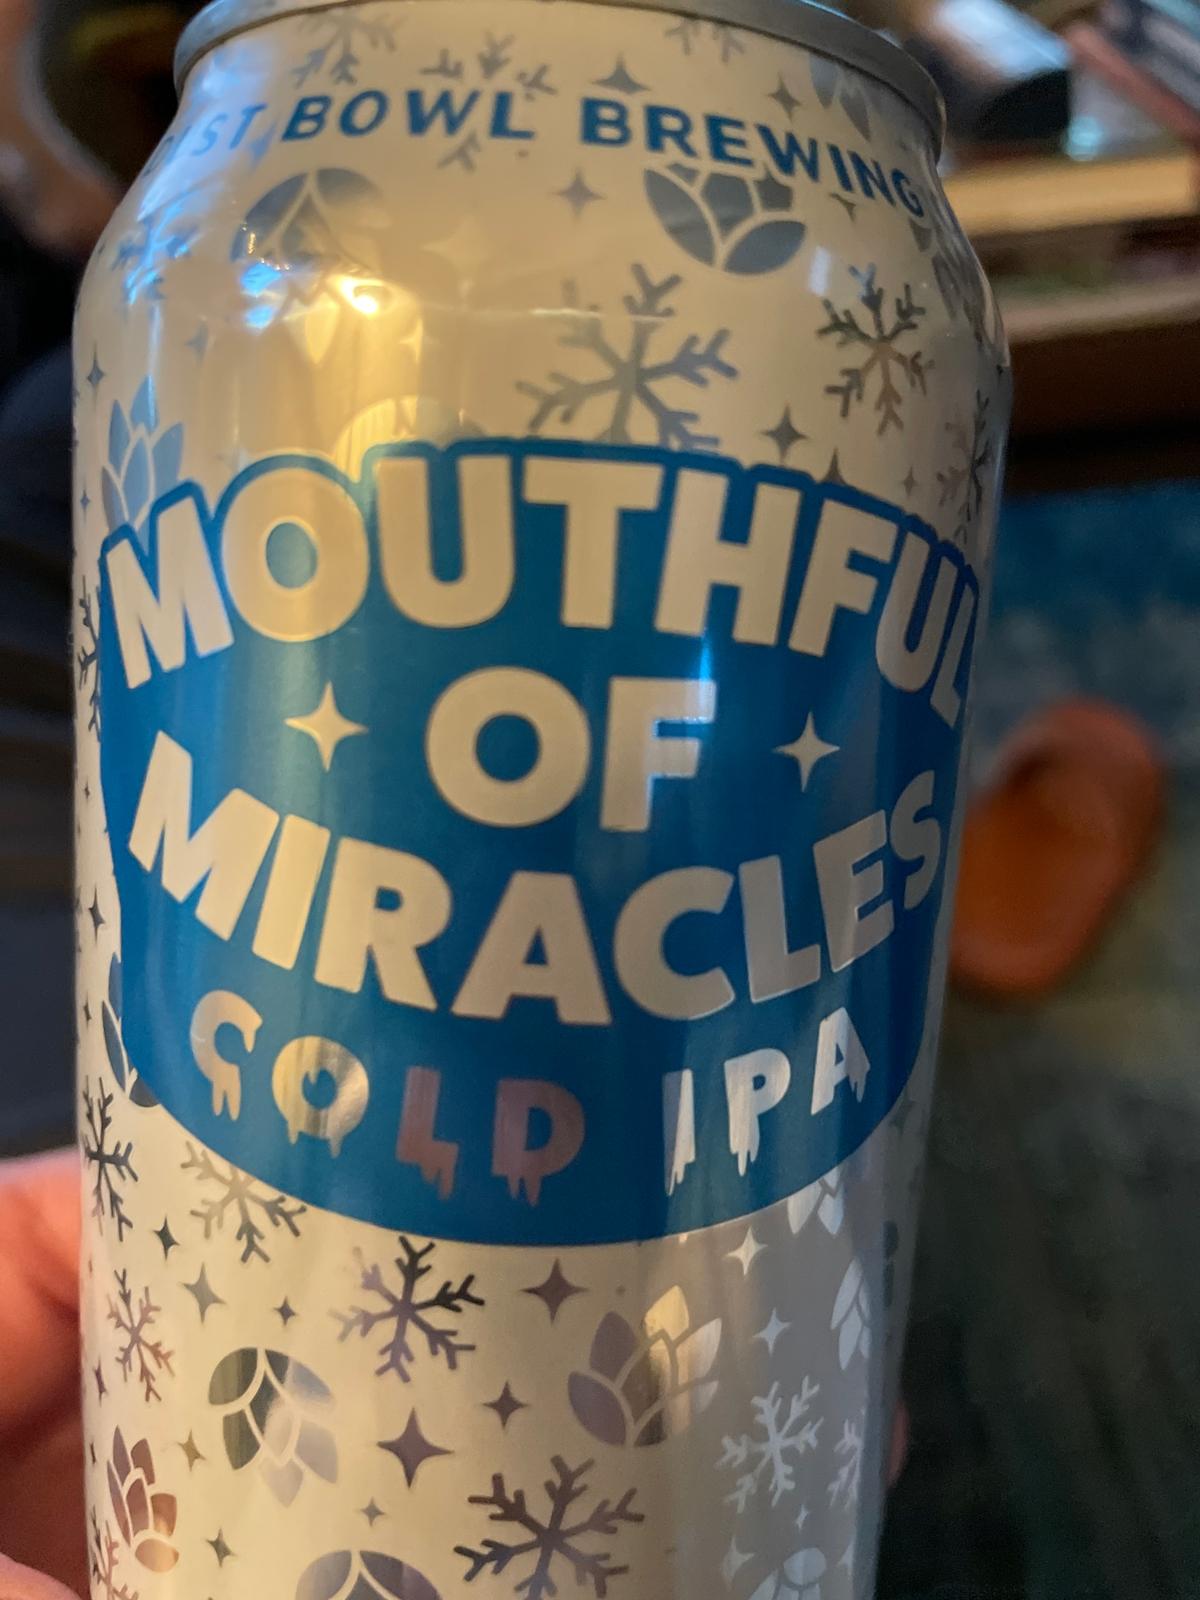 Mouthful of Miracles